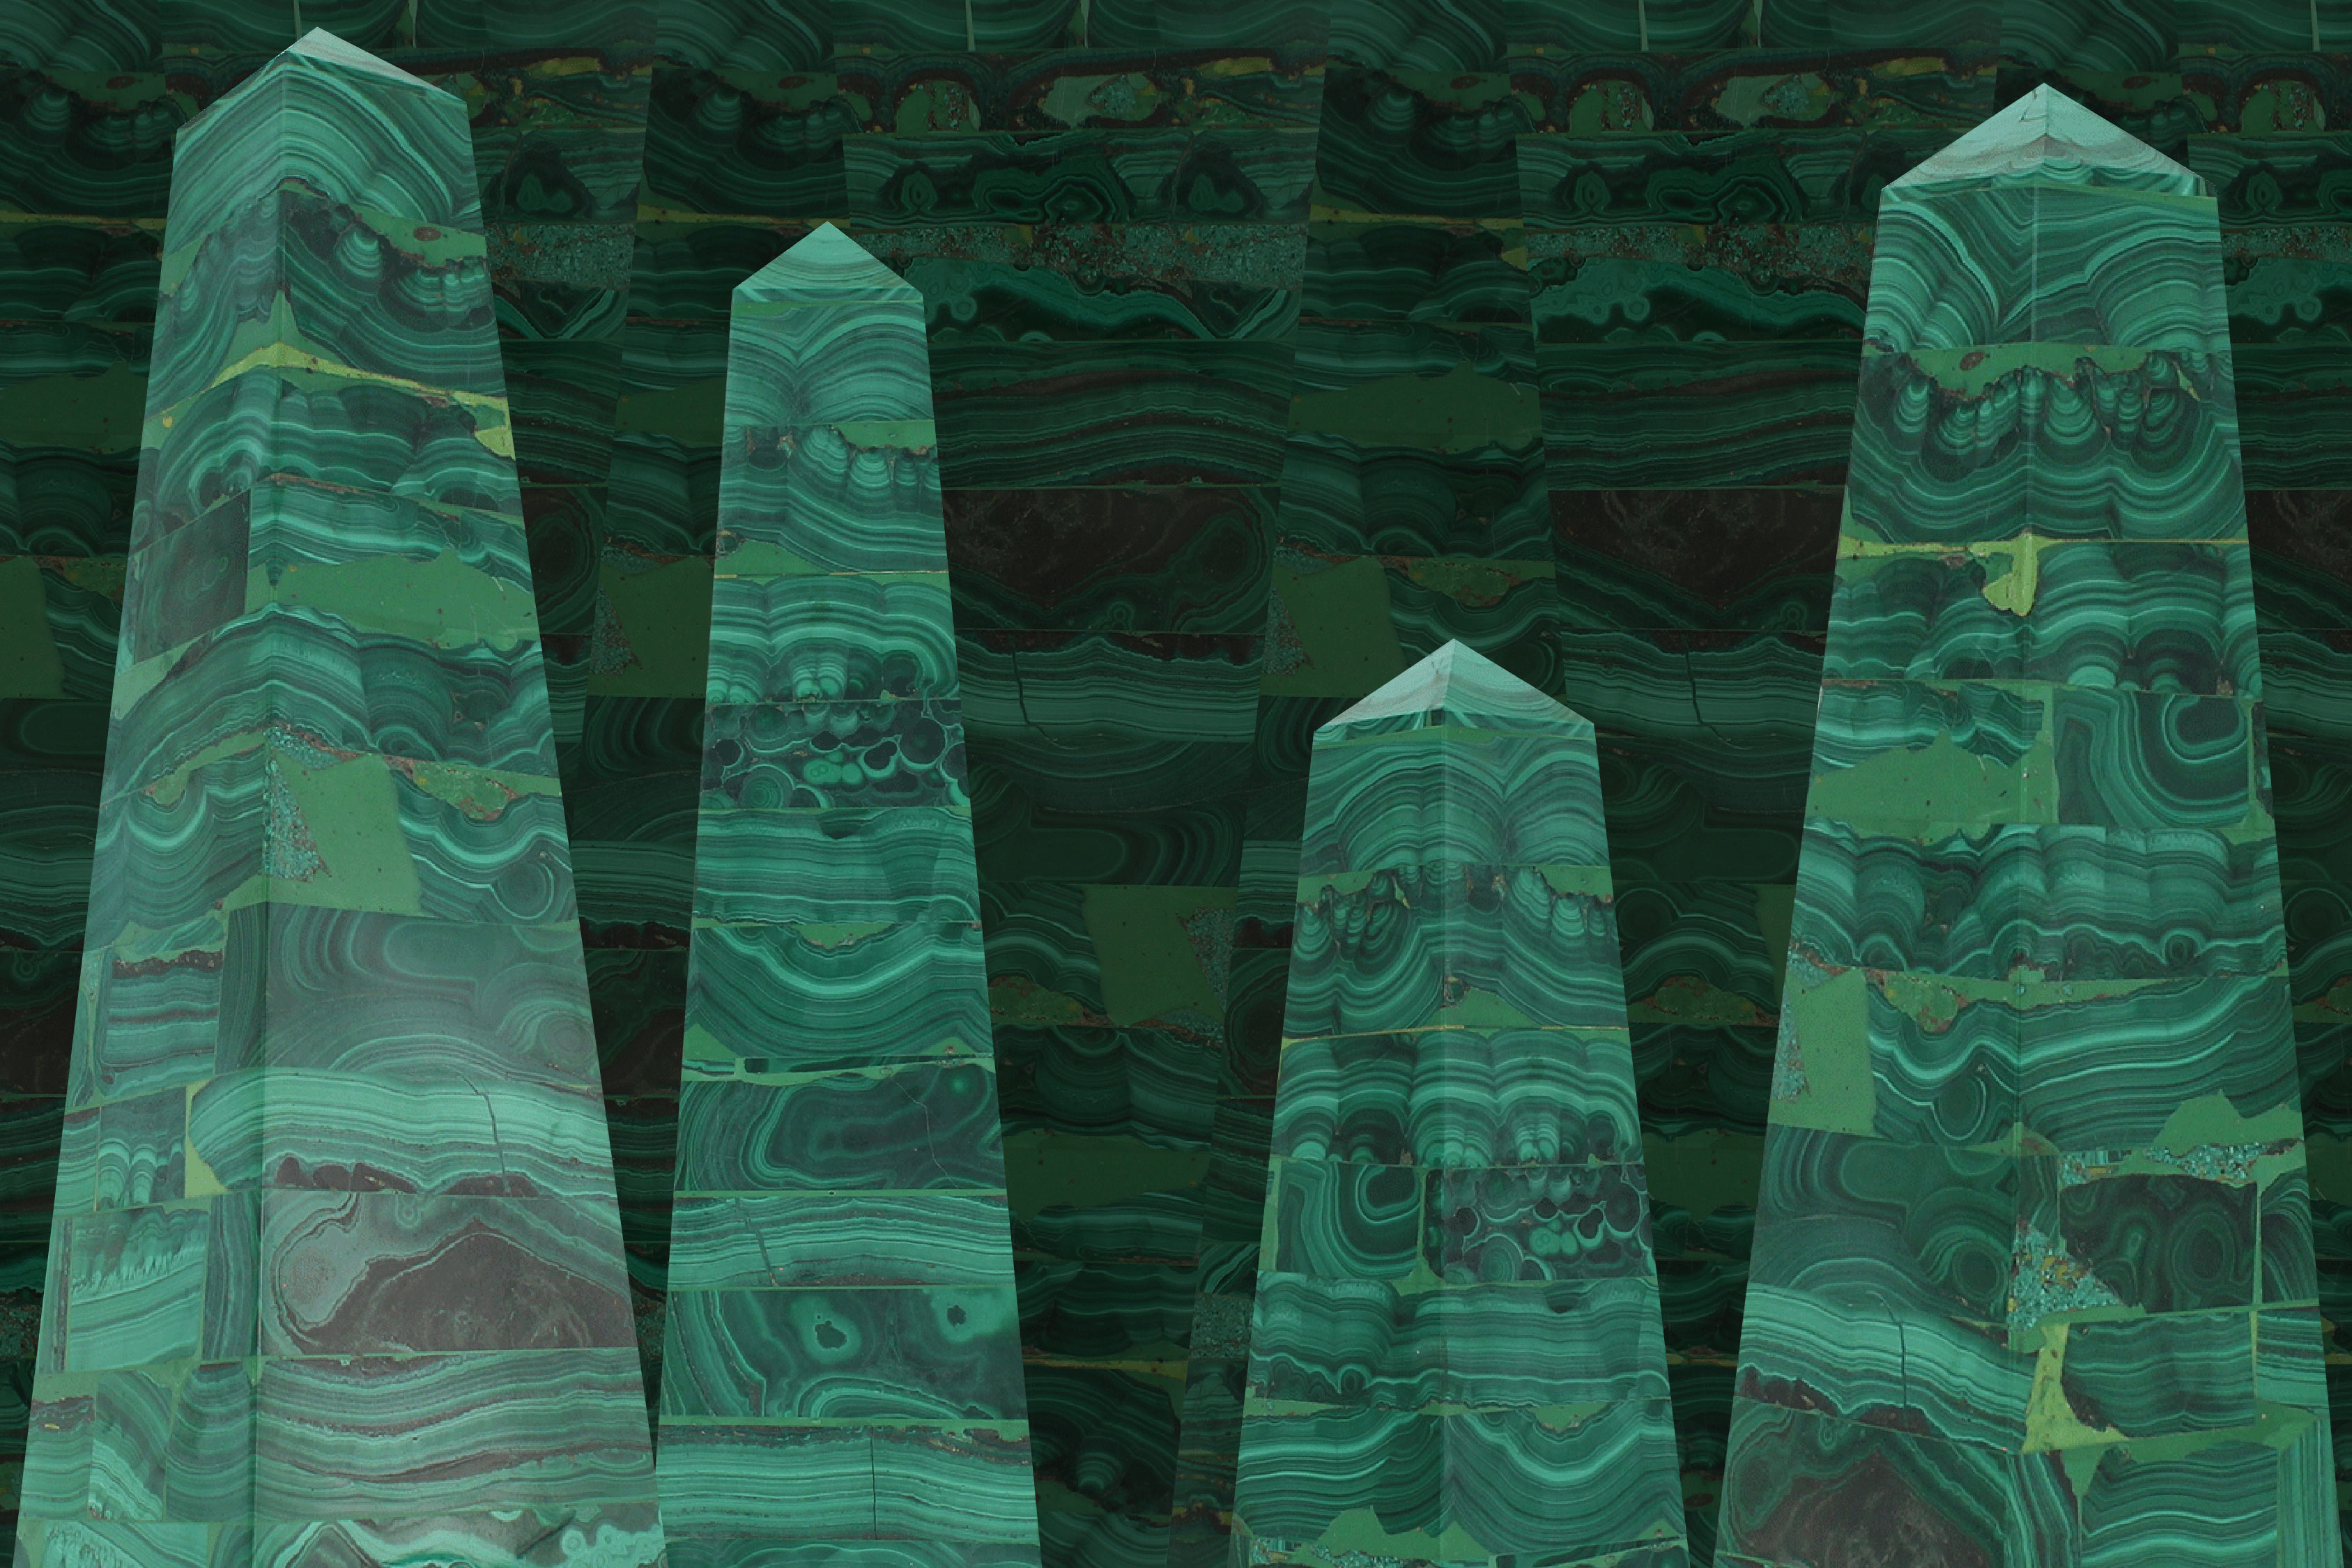 Malachite Obelisk 1 from the World's First Collection of Limited Edition Awards